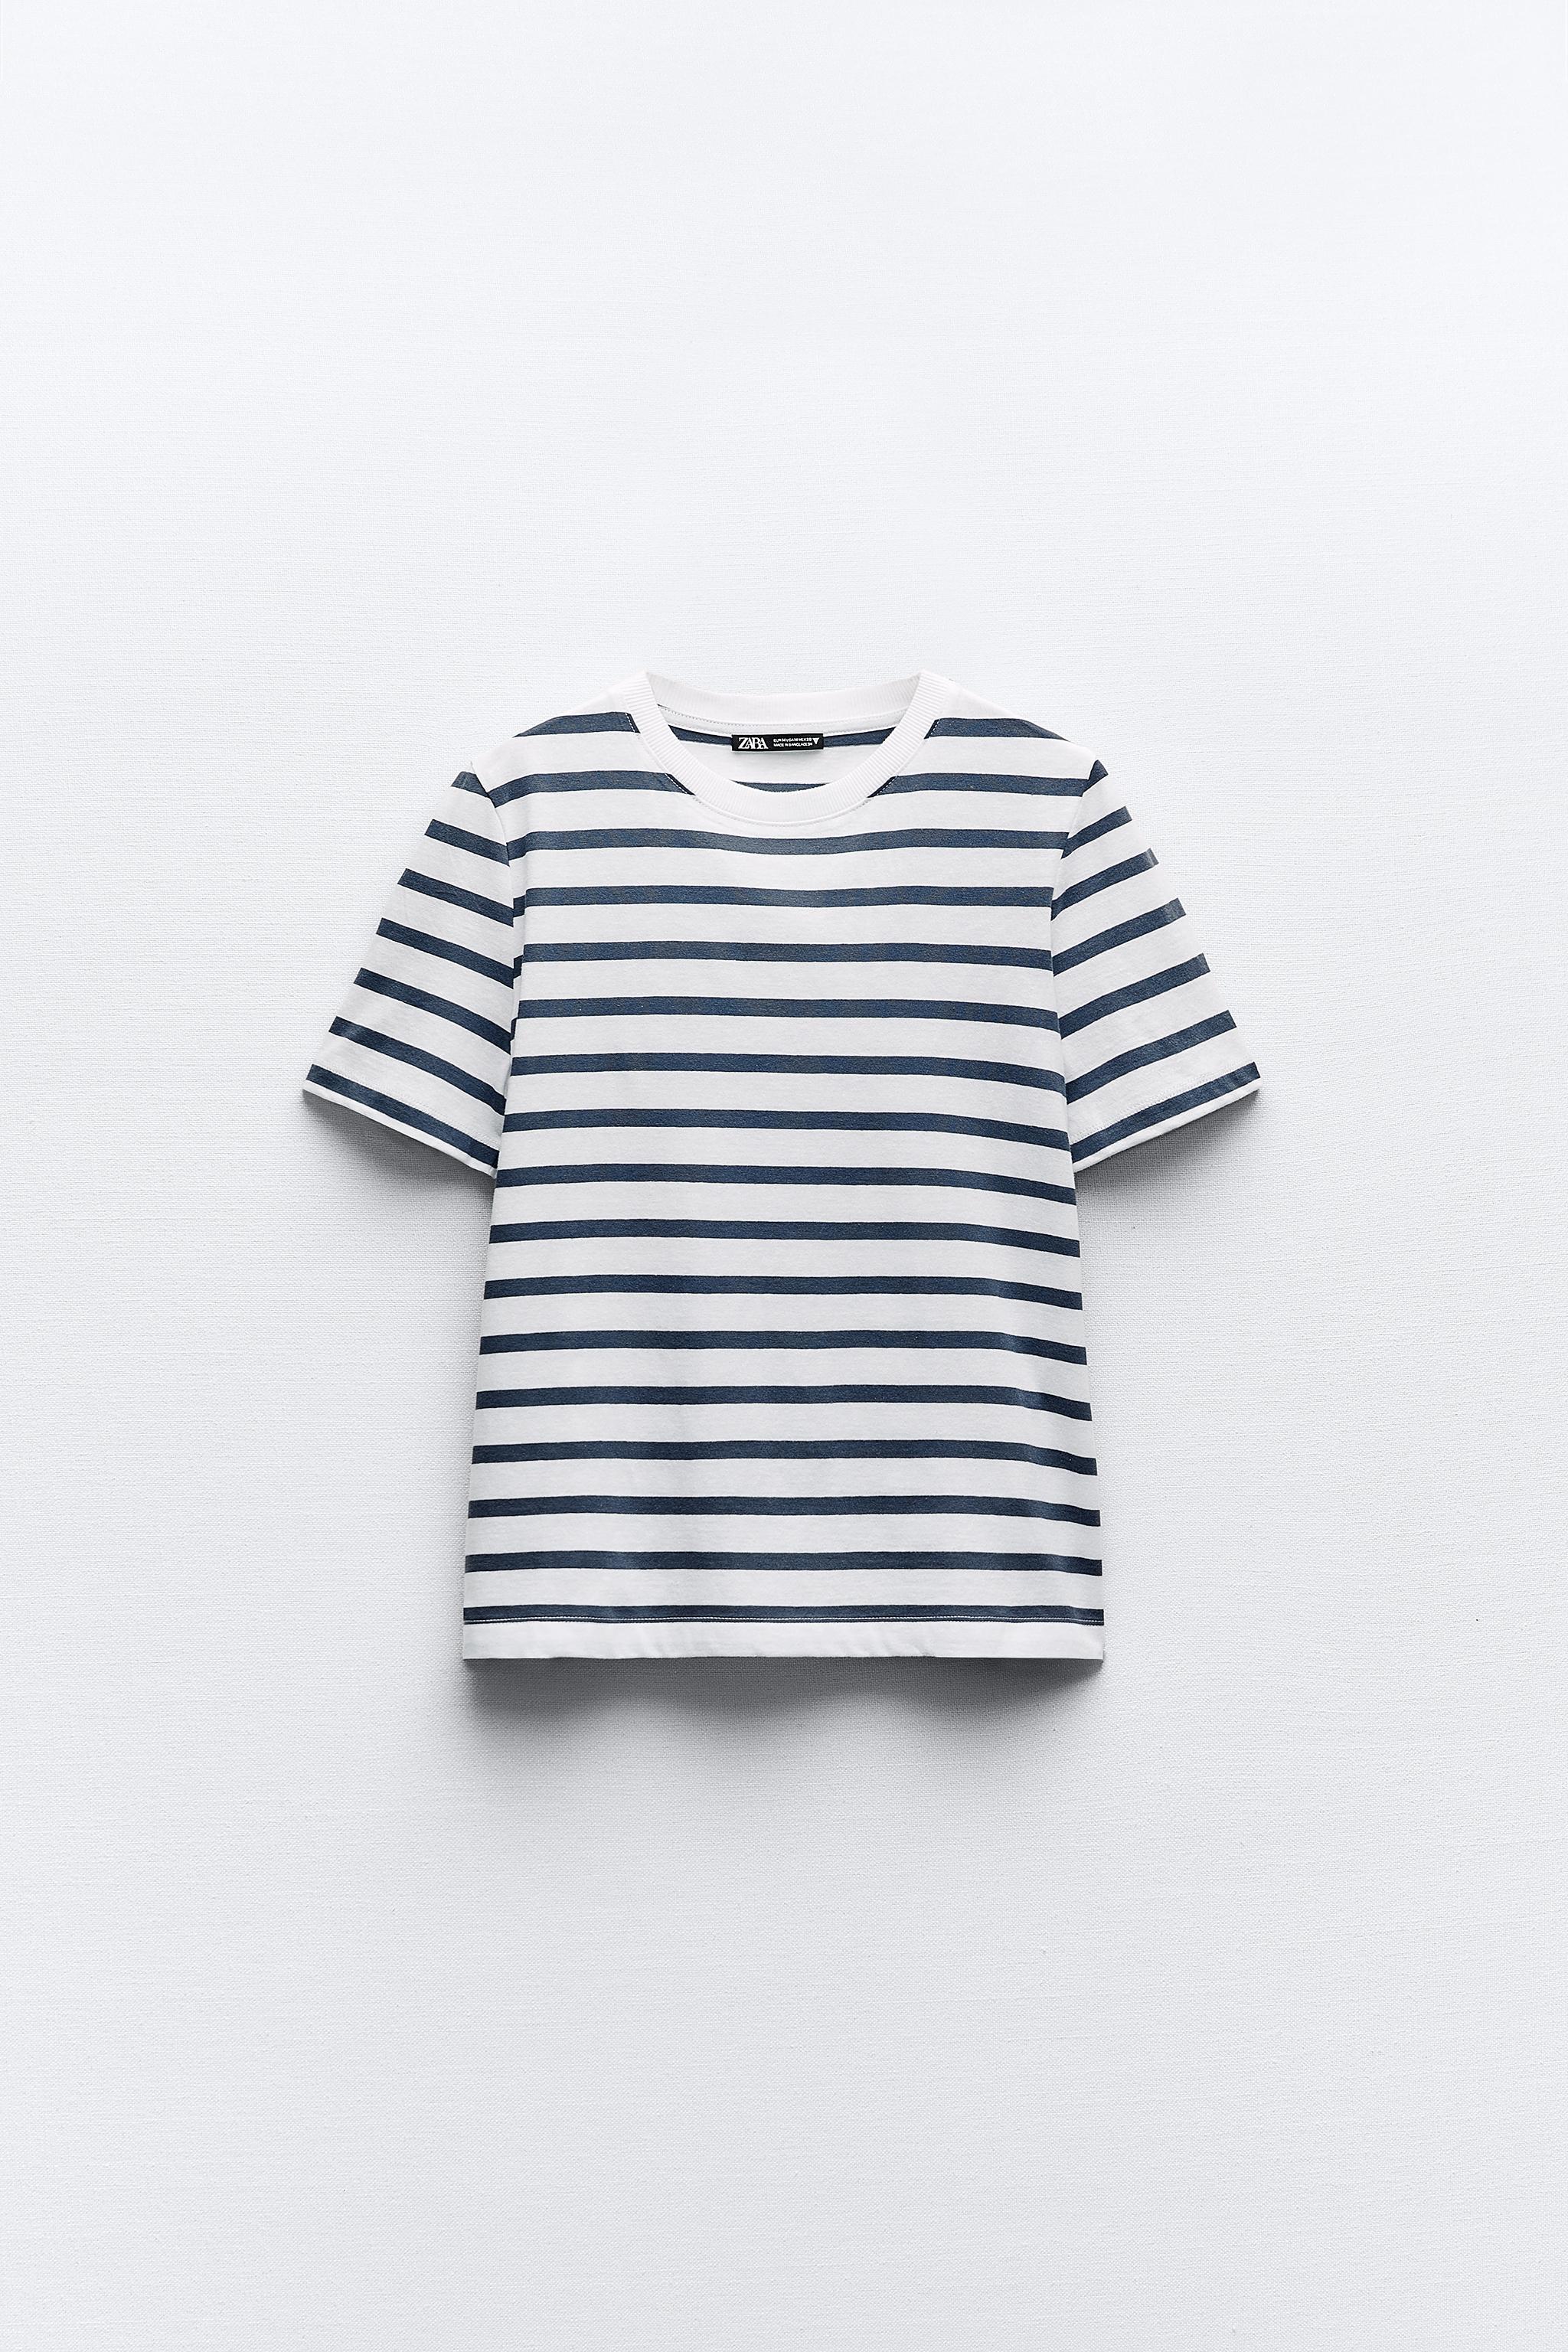 COTTON AND MODAL T-SHIRT - White